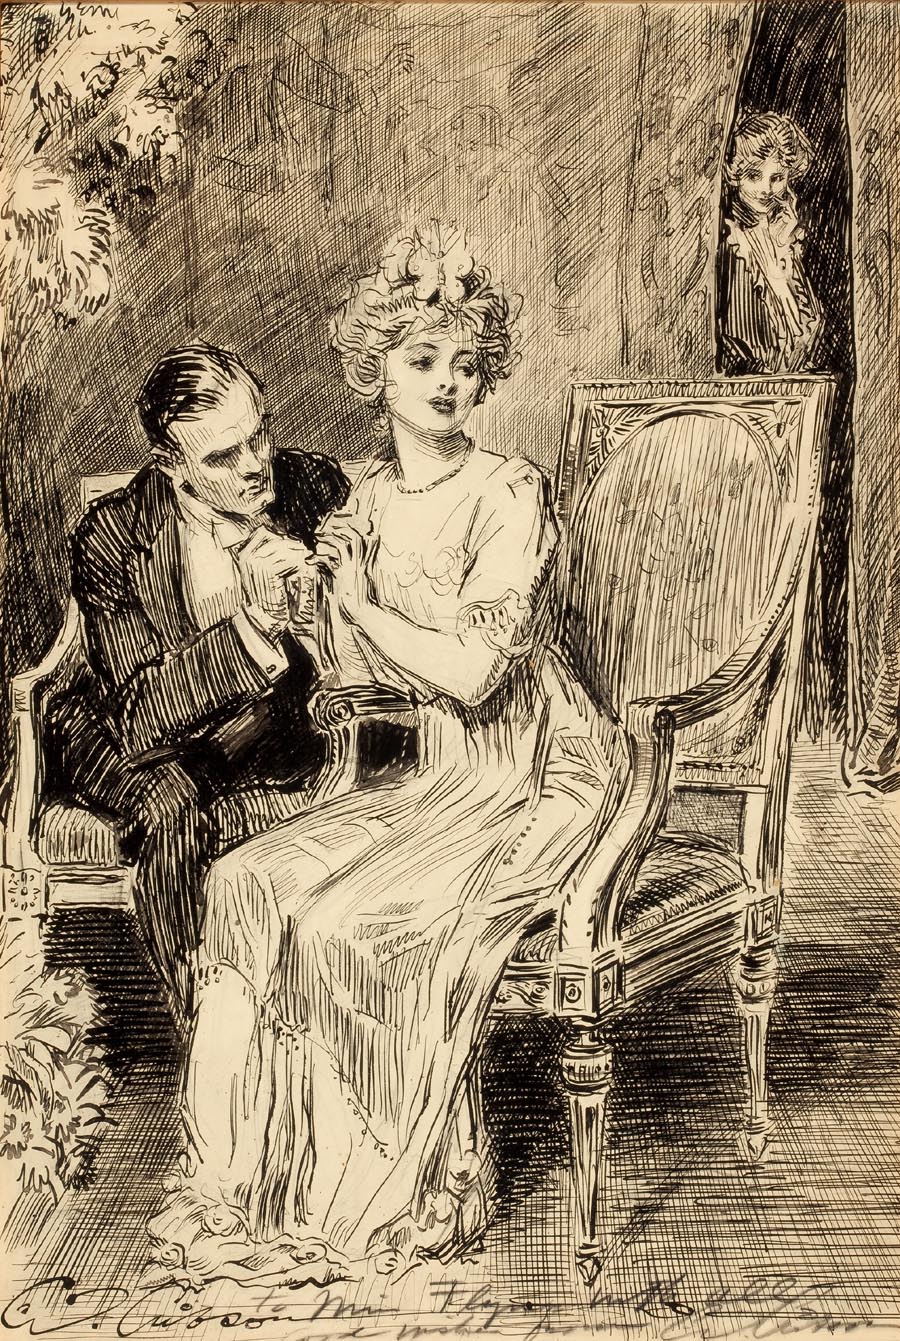 "The Proposal" by Charles Dana Gibson